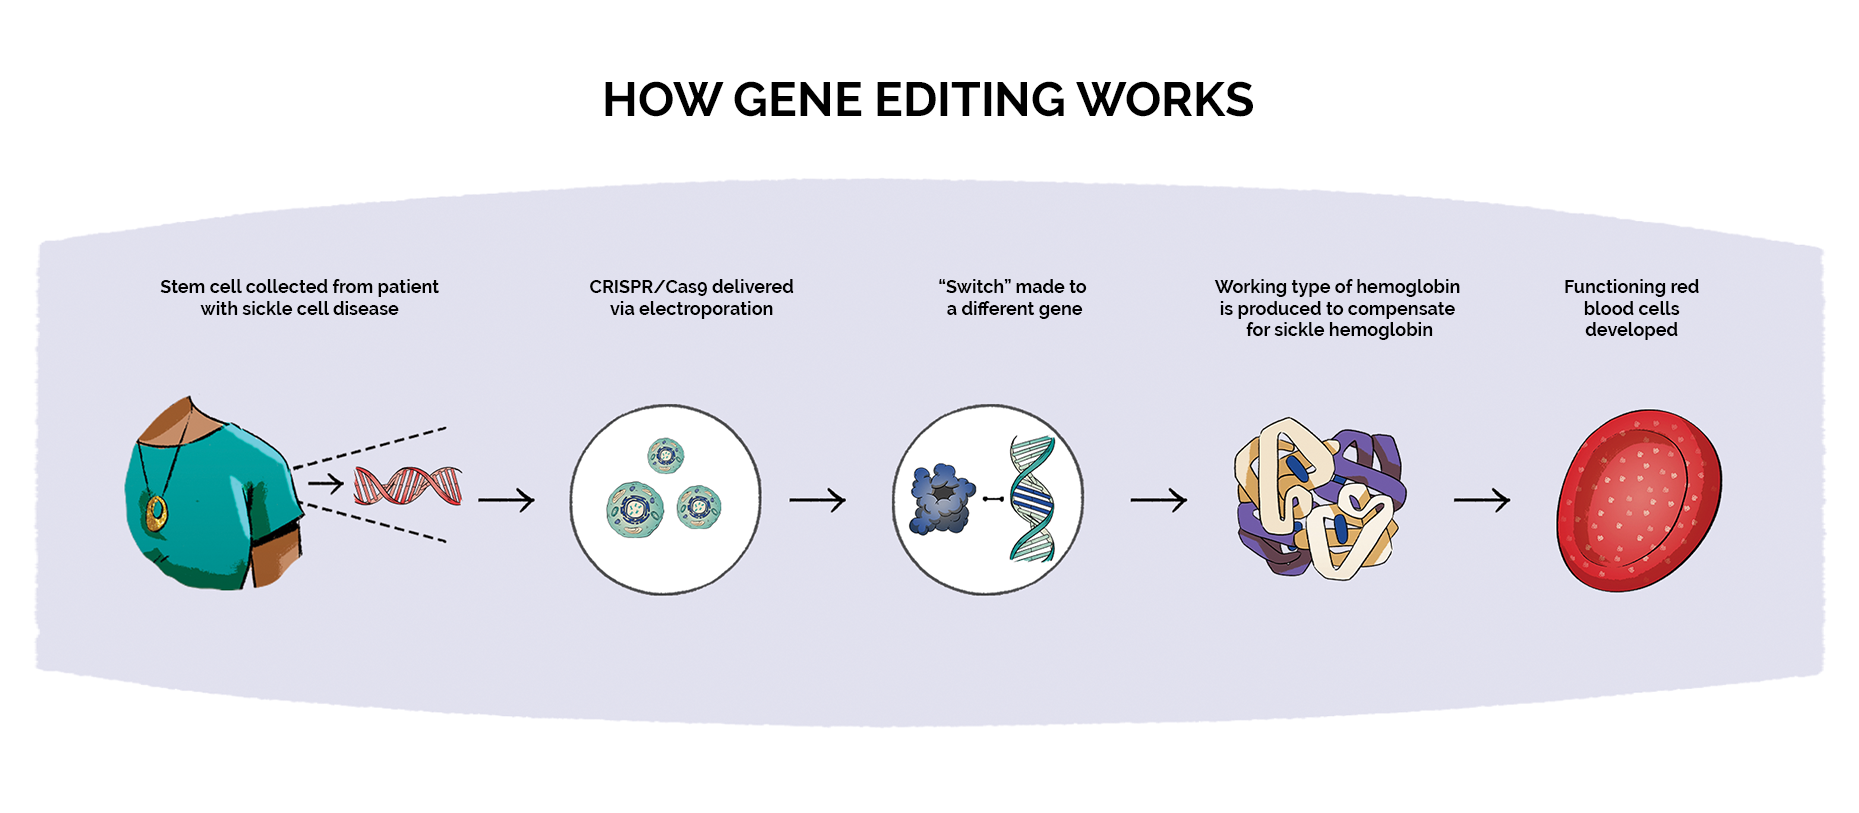 How does gene editing work for sickle cell disease